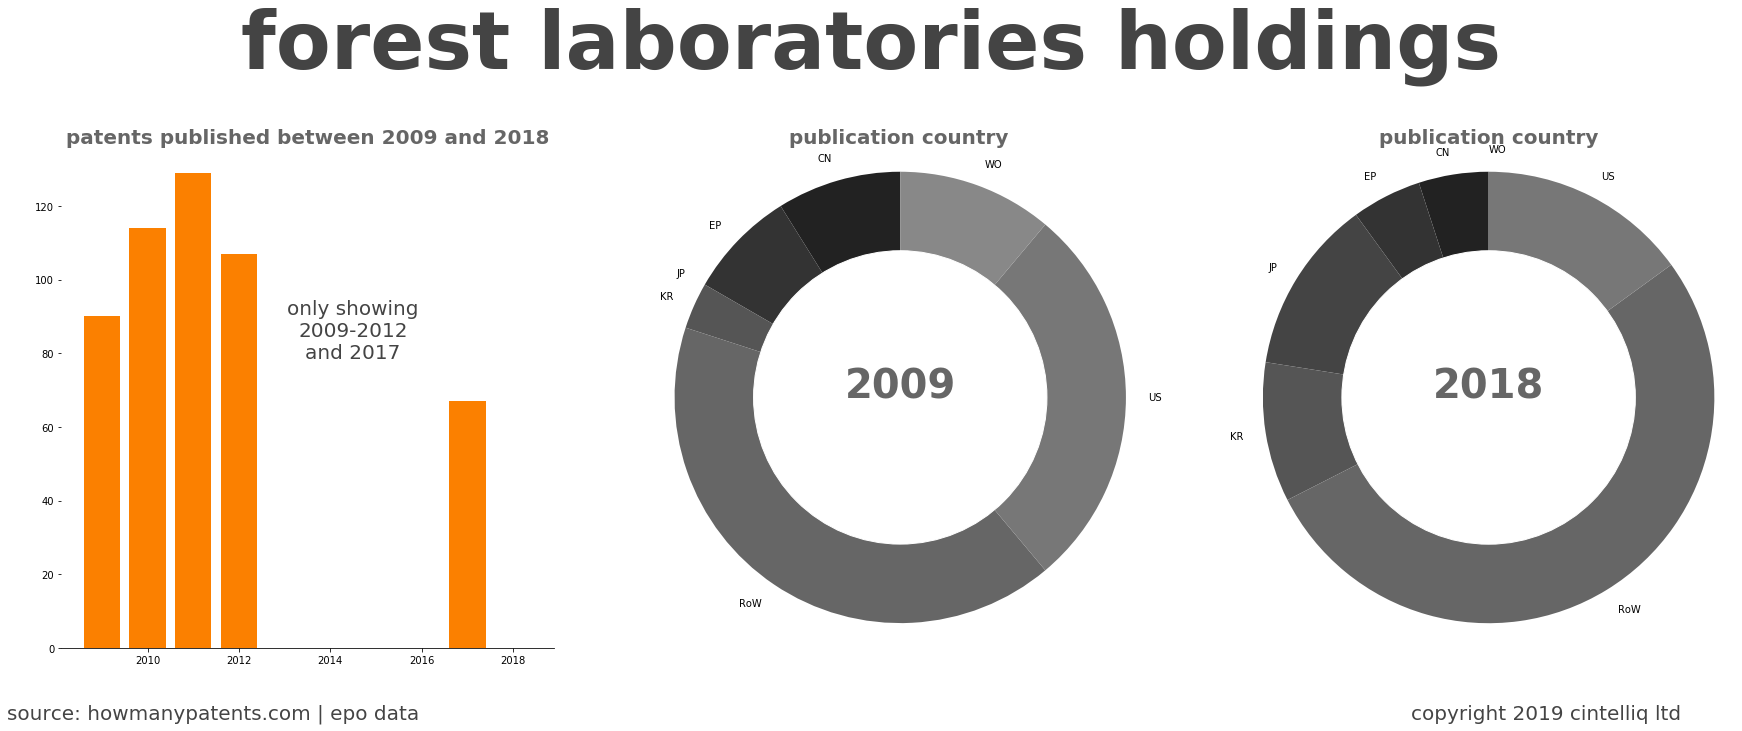 summary of patents for Forest Laboratories Holdings